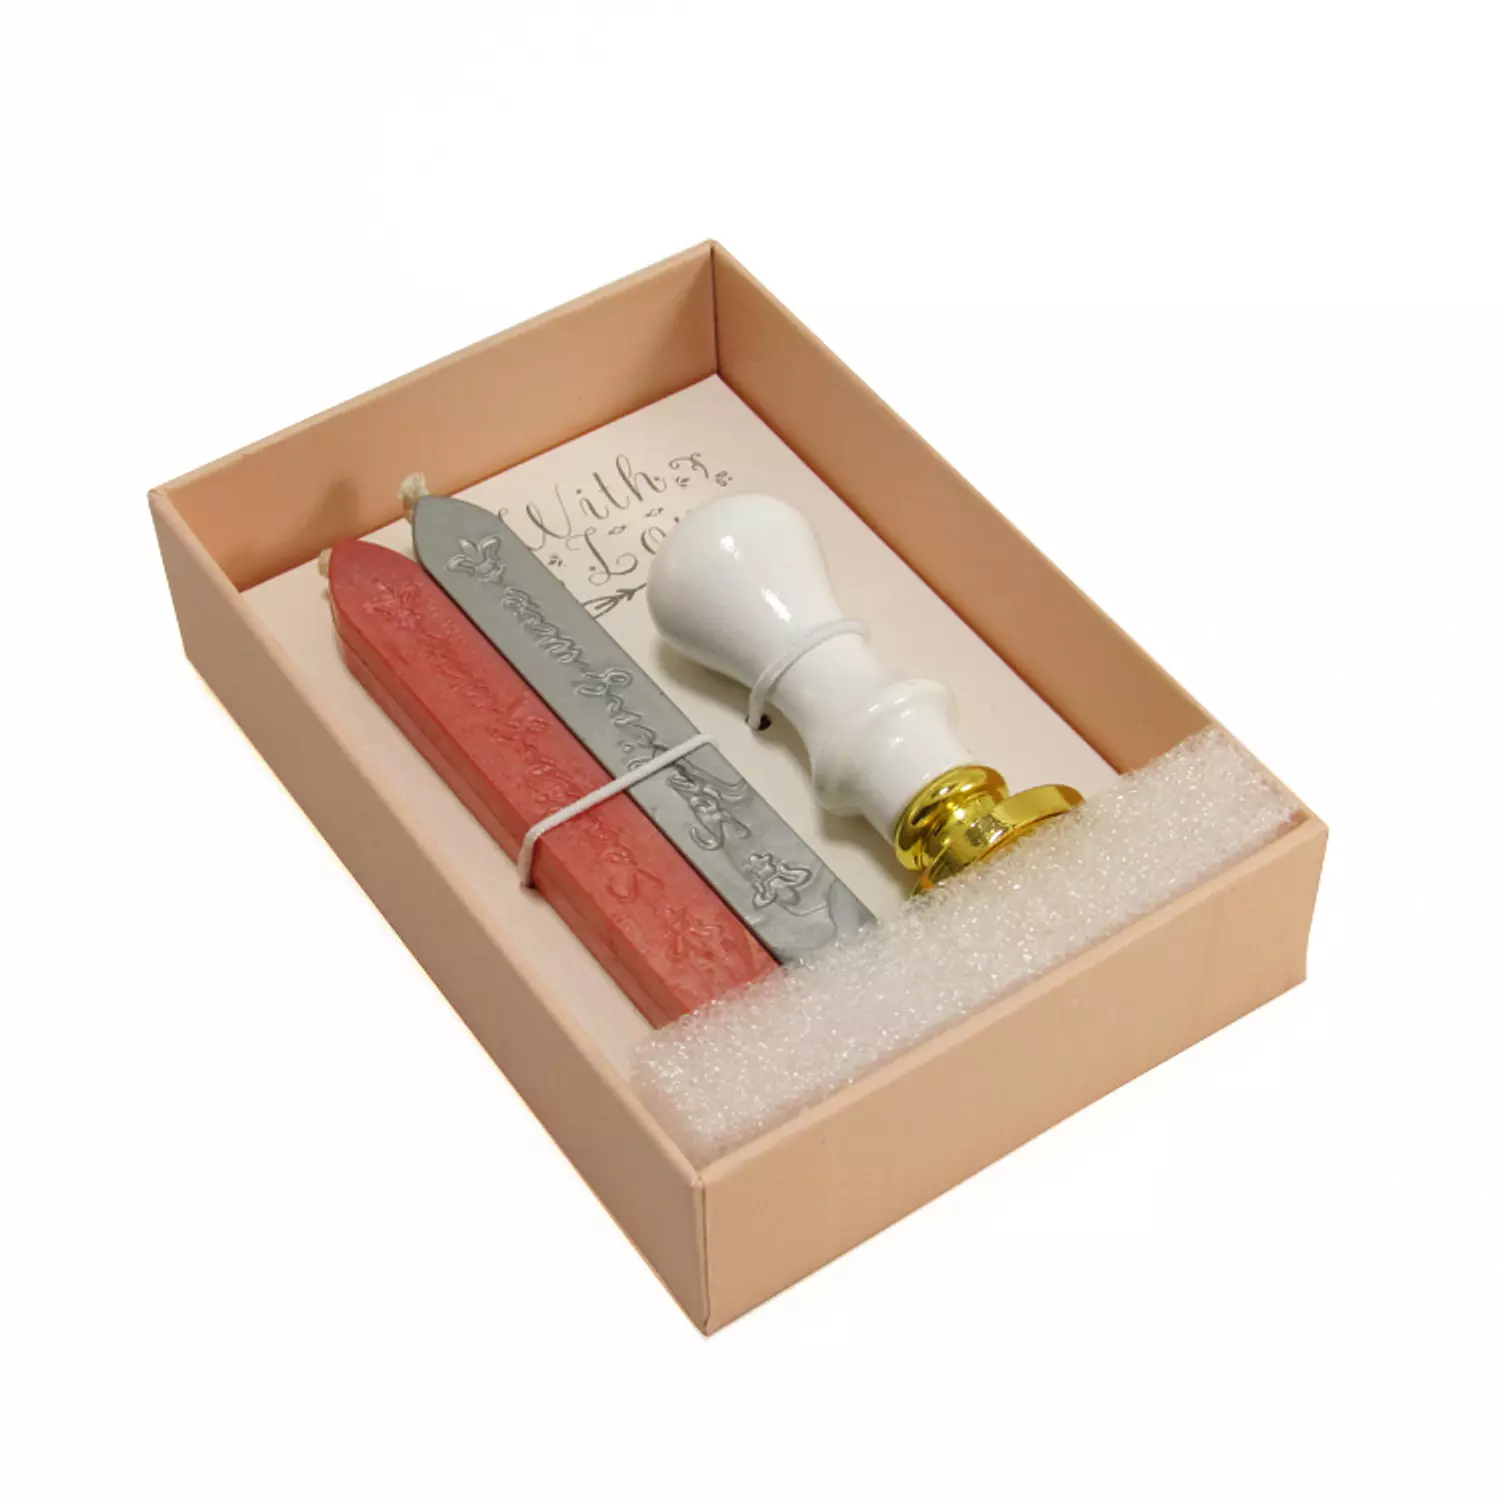 Sealing wax set - one stamp & 2 pieces of wax  2